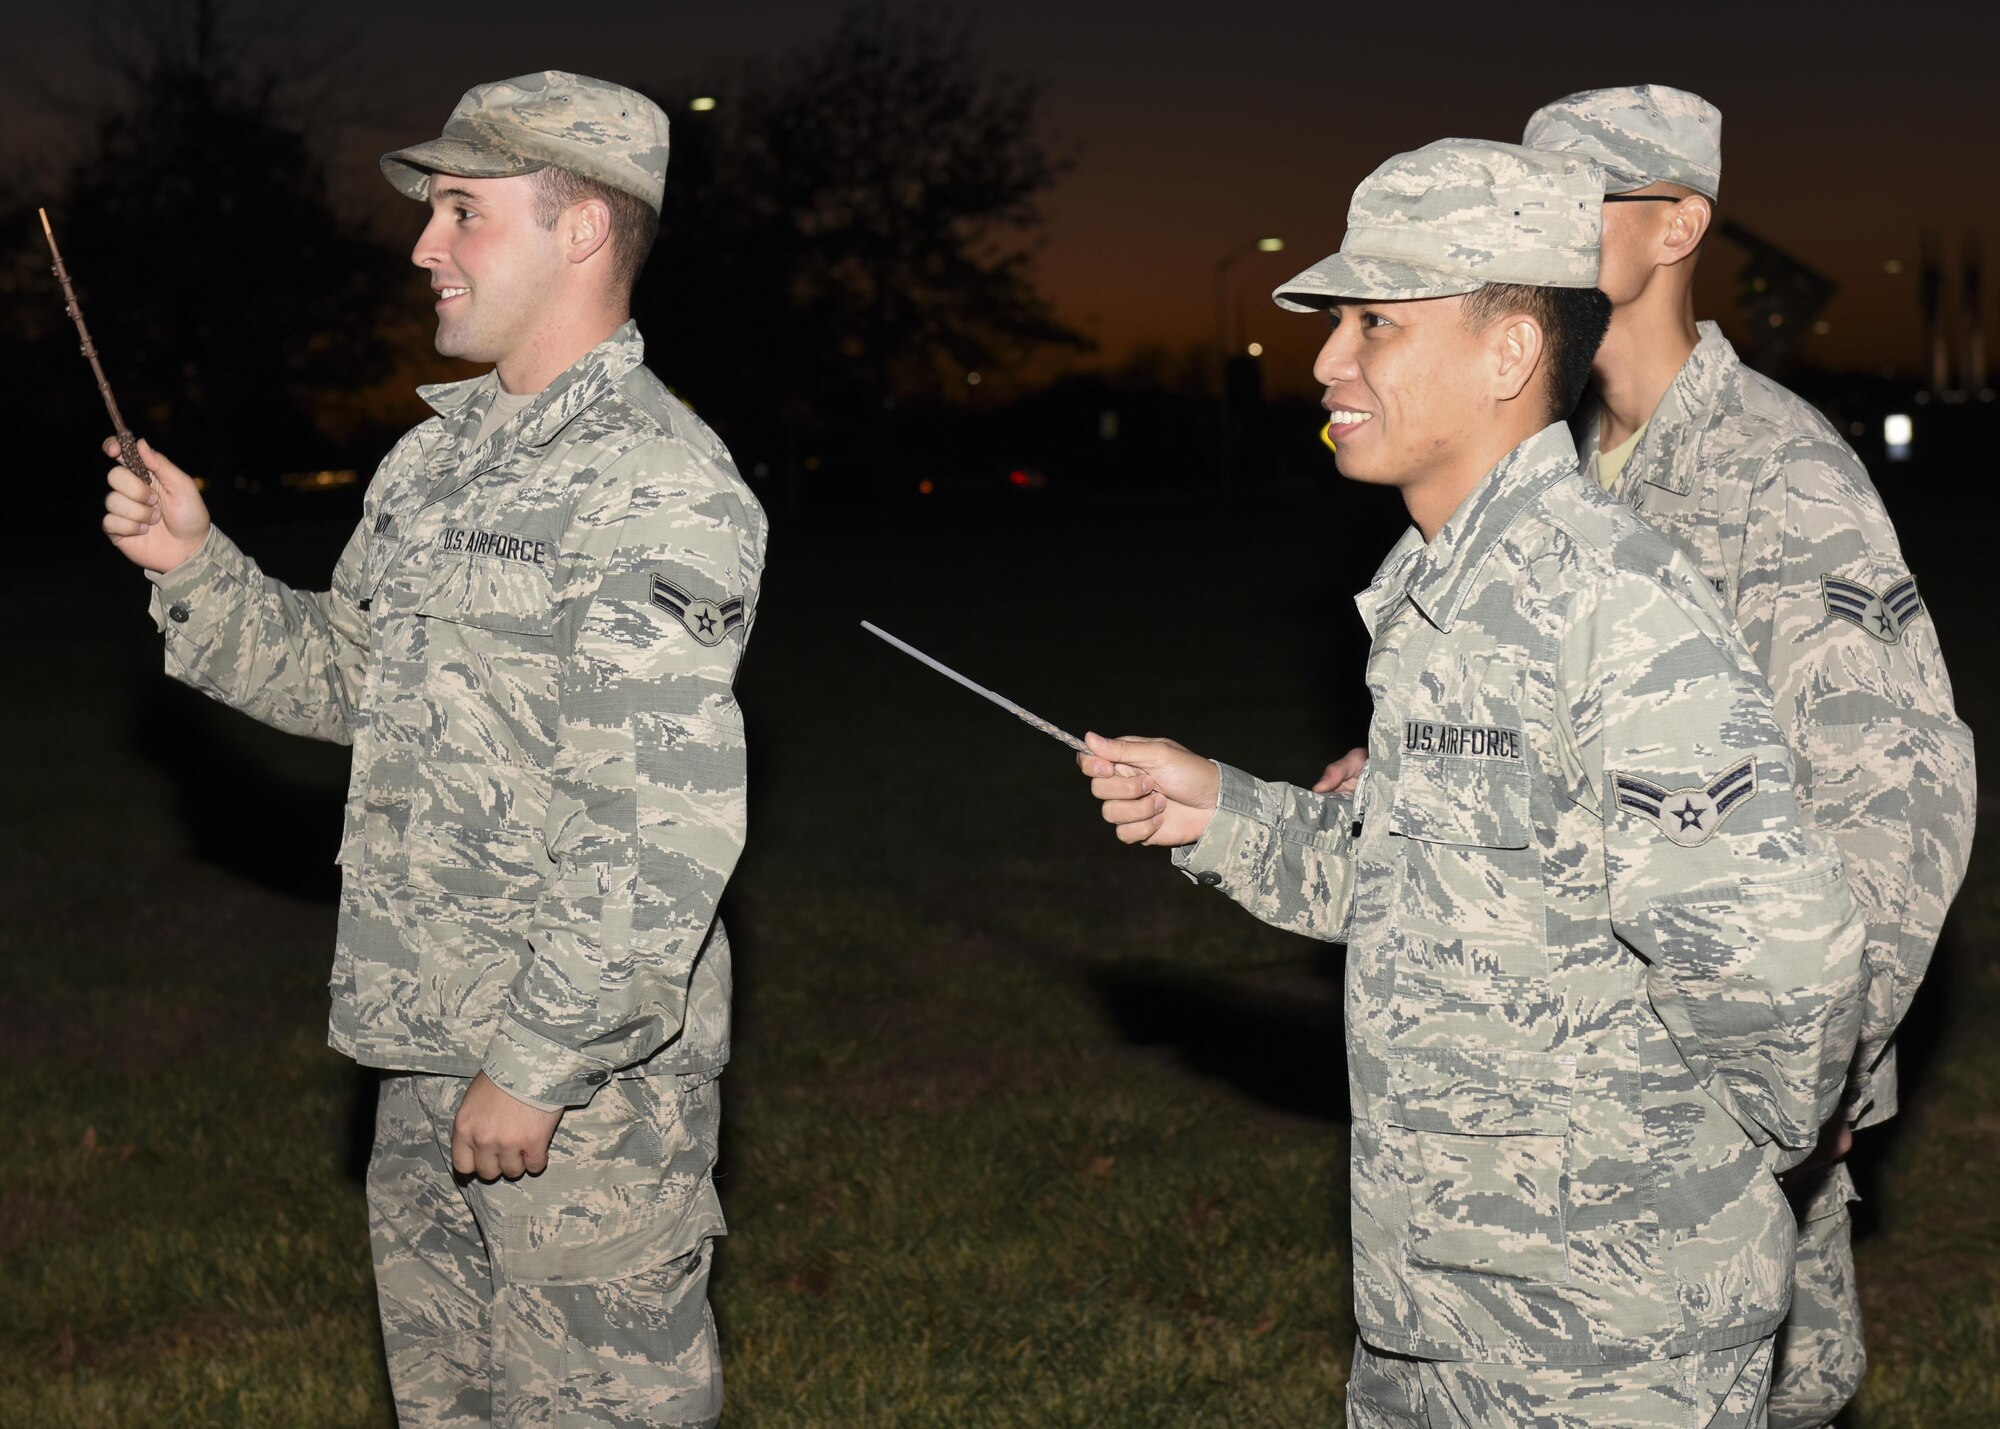 Airmen hold up homemade wands as part of the annual tree lighting event at Whiteman Air Force Base, Mo., Nov. 29, 2016. Attendees were encouraged to wave their wands to help light the decorations to kick off the holiday events. 